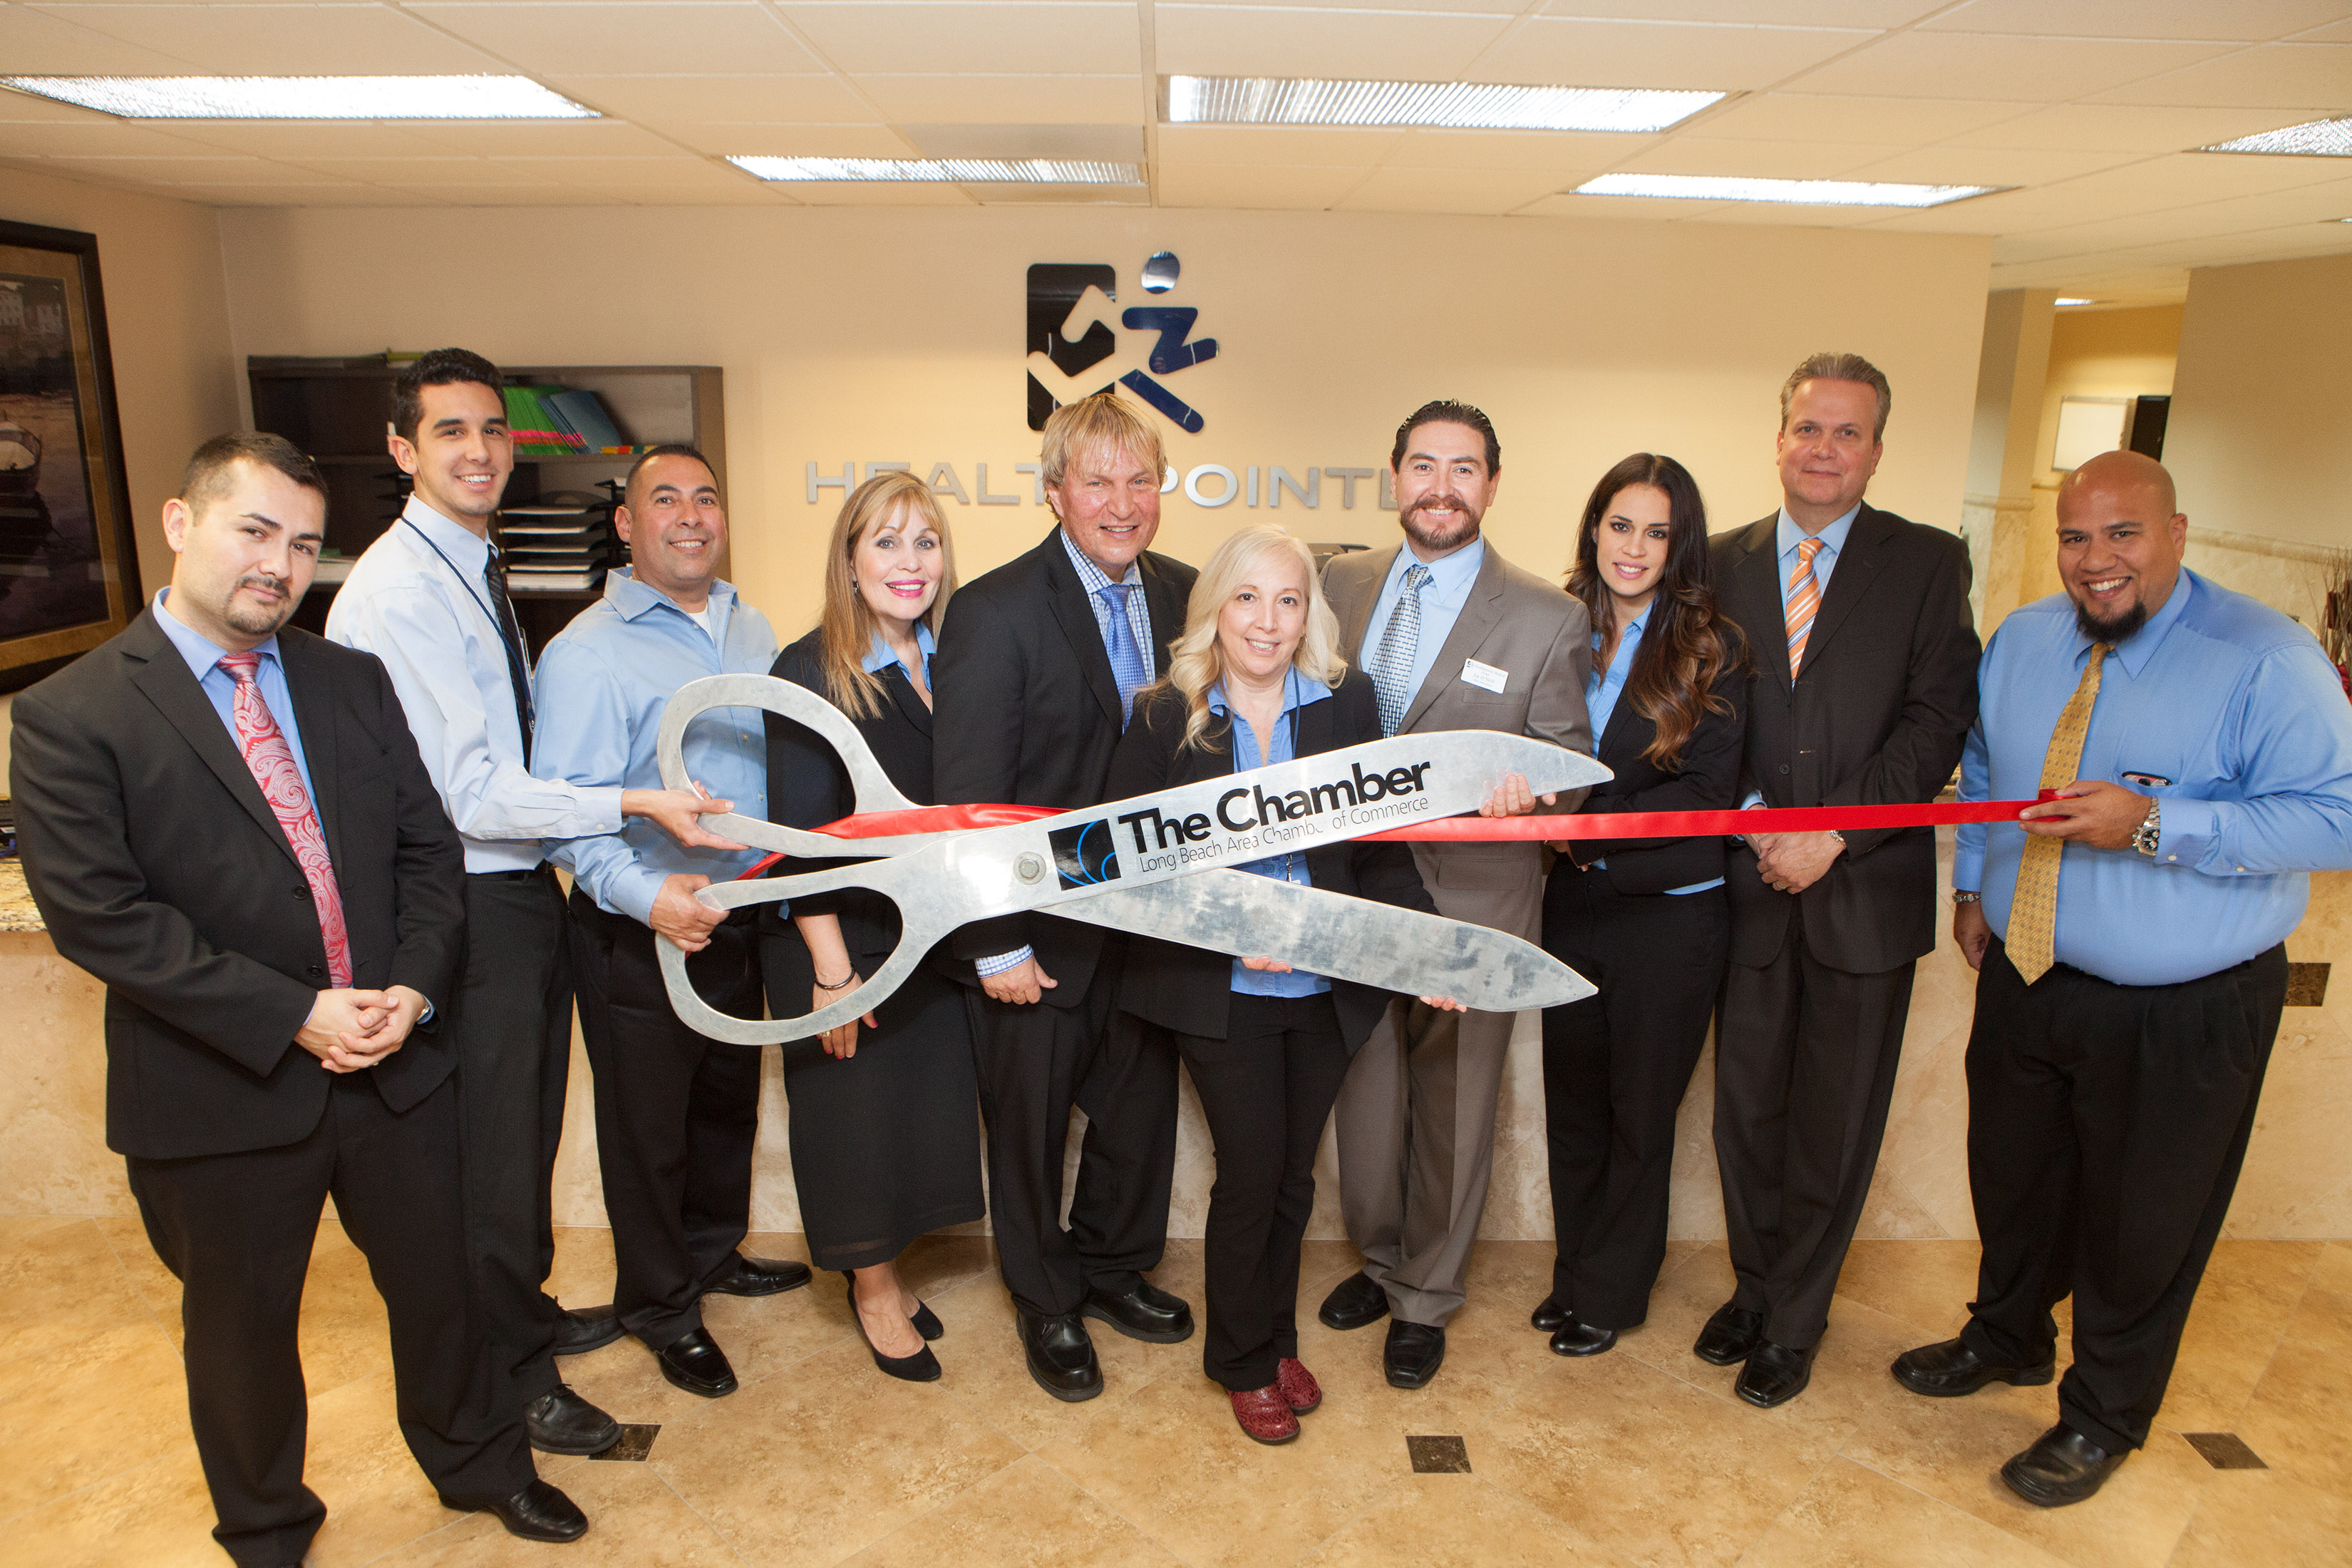 Healthpointe Urgent Care is now open in Long Beach, California